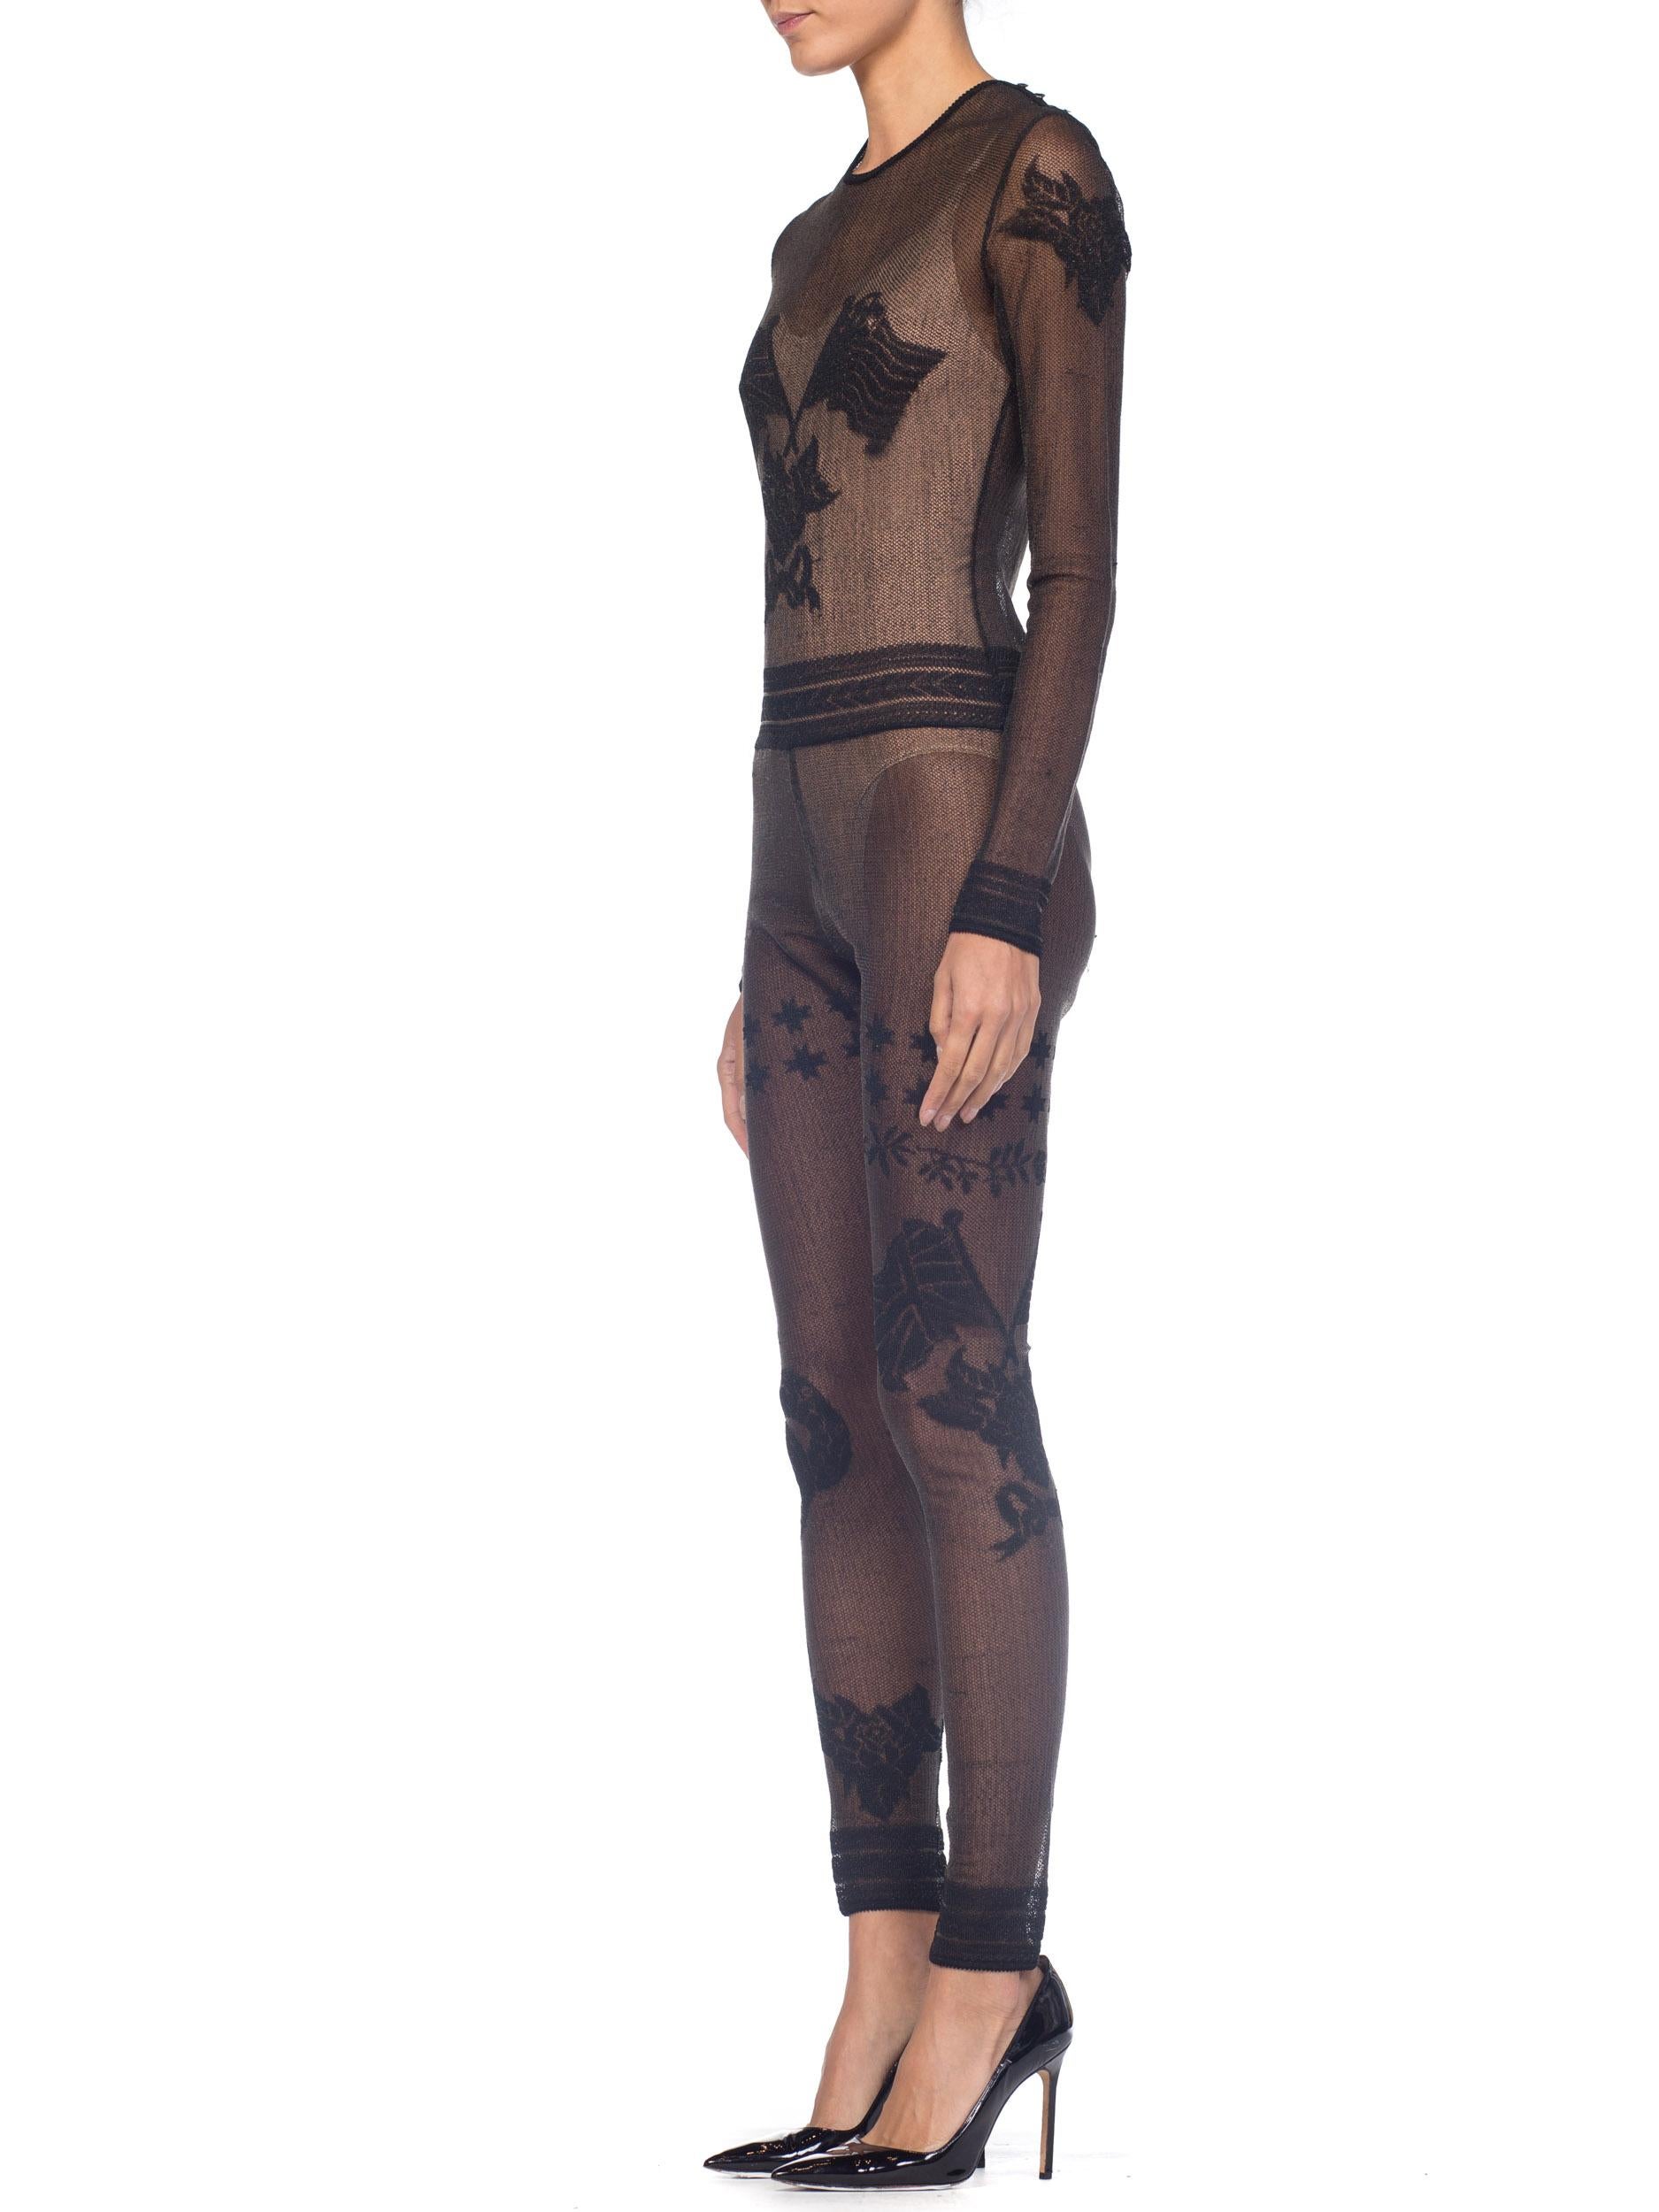 1990S JOHN GALLIANO Sheer Knit Bodysuit Jumpsuit From The Siouxsie Sphinx Colle 2